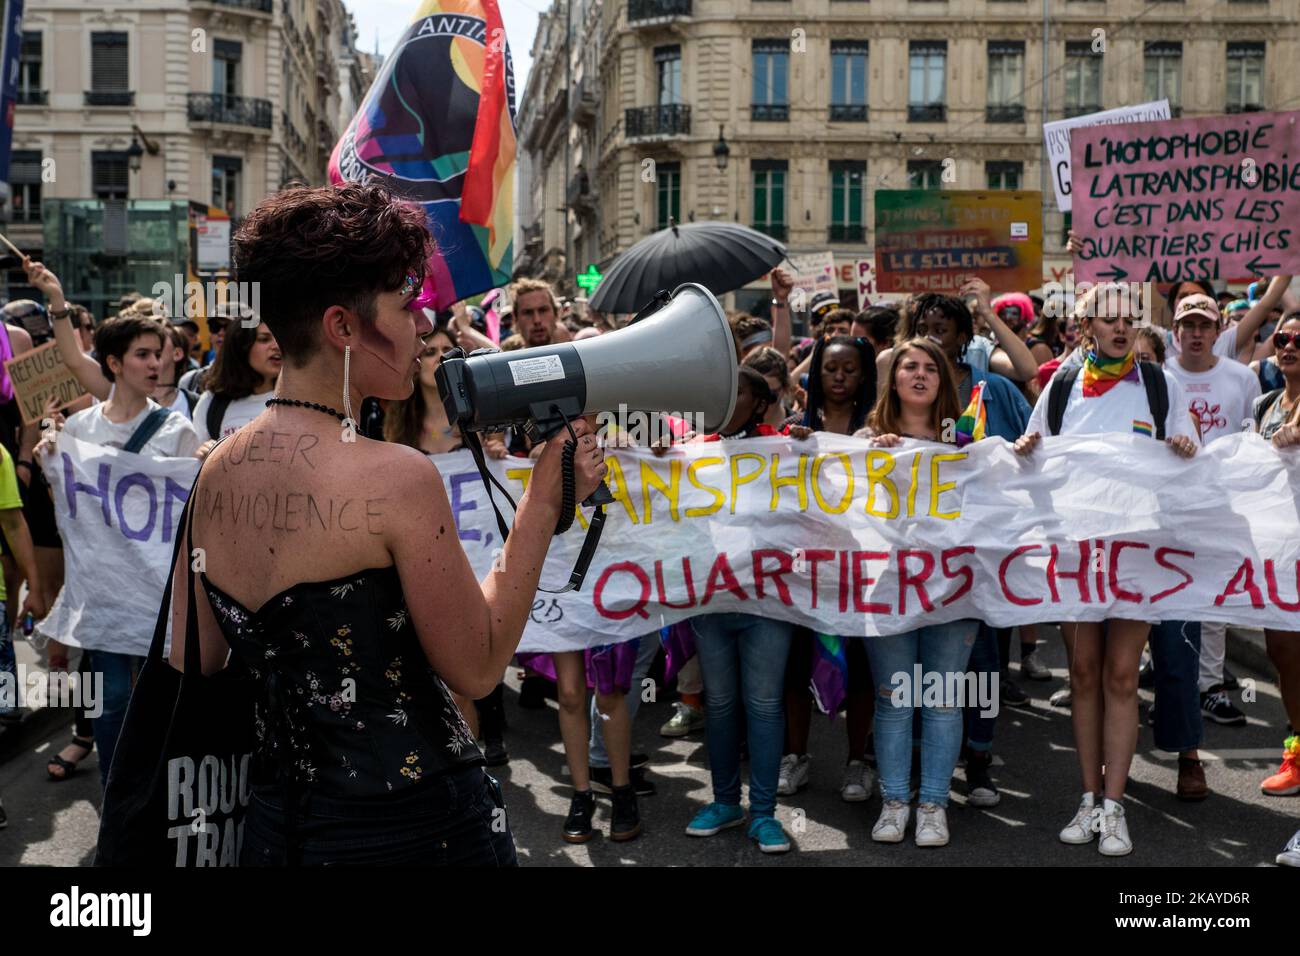 Tens of thousands take part in the annual Gay Pride Parade in Lyon, eastern France on June 16, 2018. Tens of thousands took to the streets waving rainbow flags and condemning discrimination in all its forms. (Photo by Nicolas Liponne/NurPhoto) Stock Photo